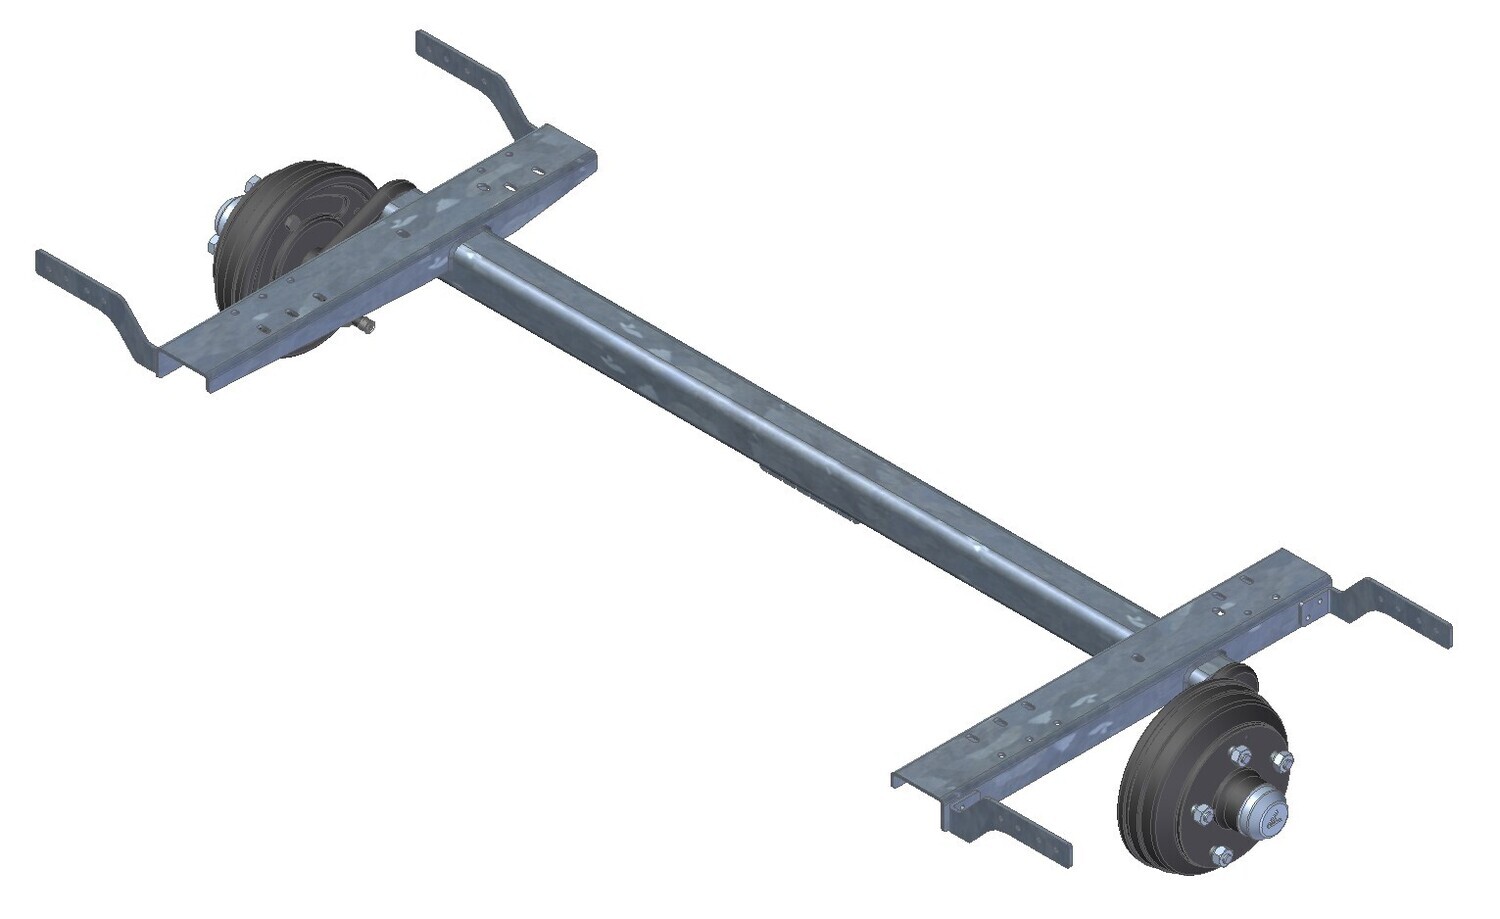 1800kg braked trailer axle for 1500mm wide chassis